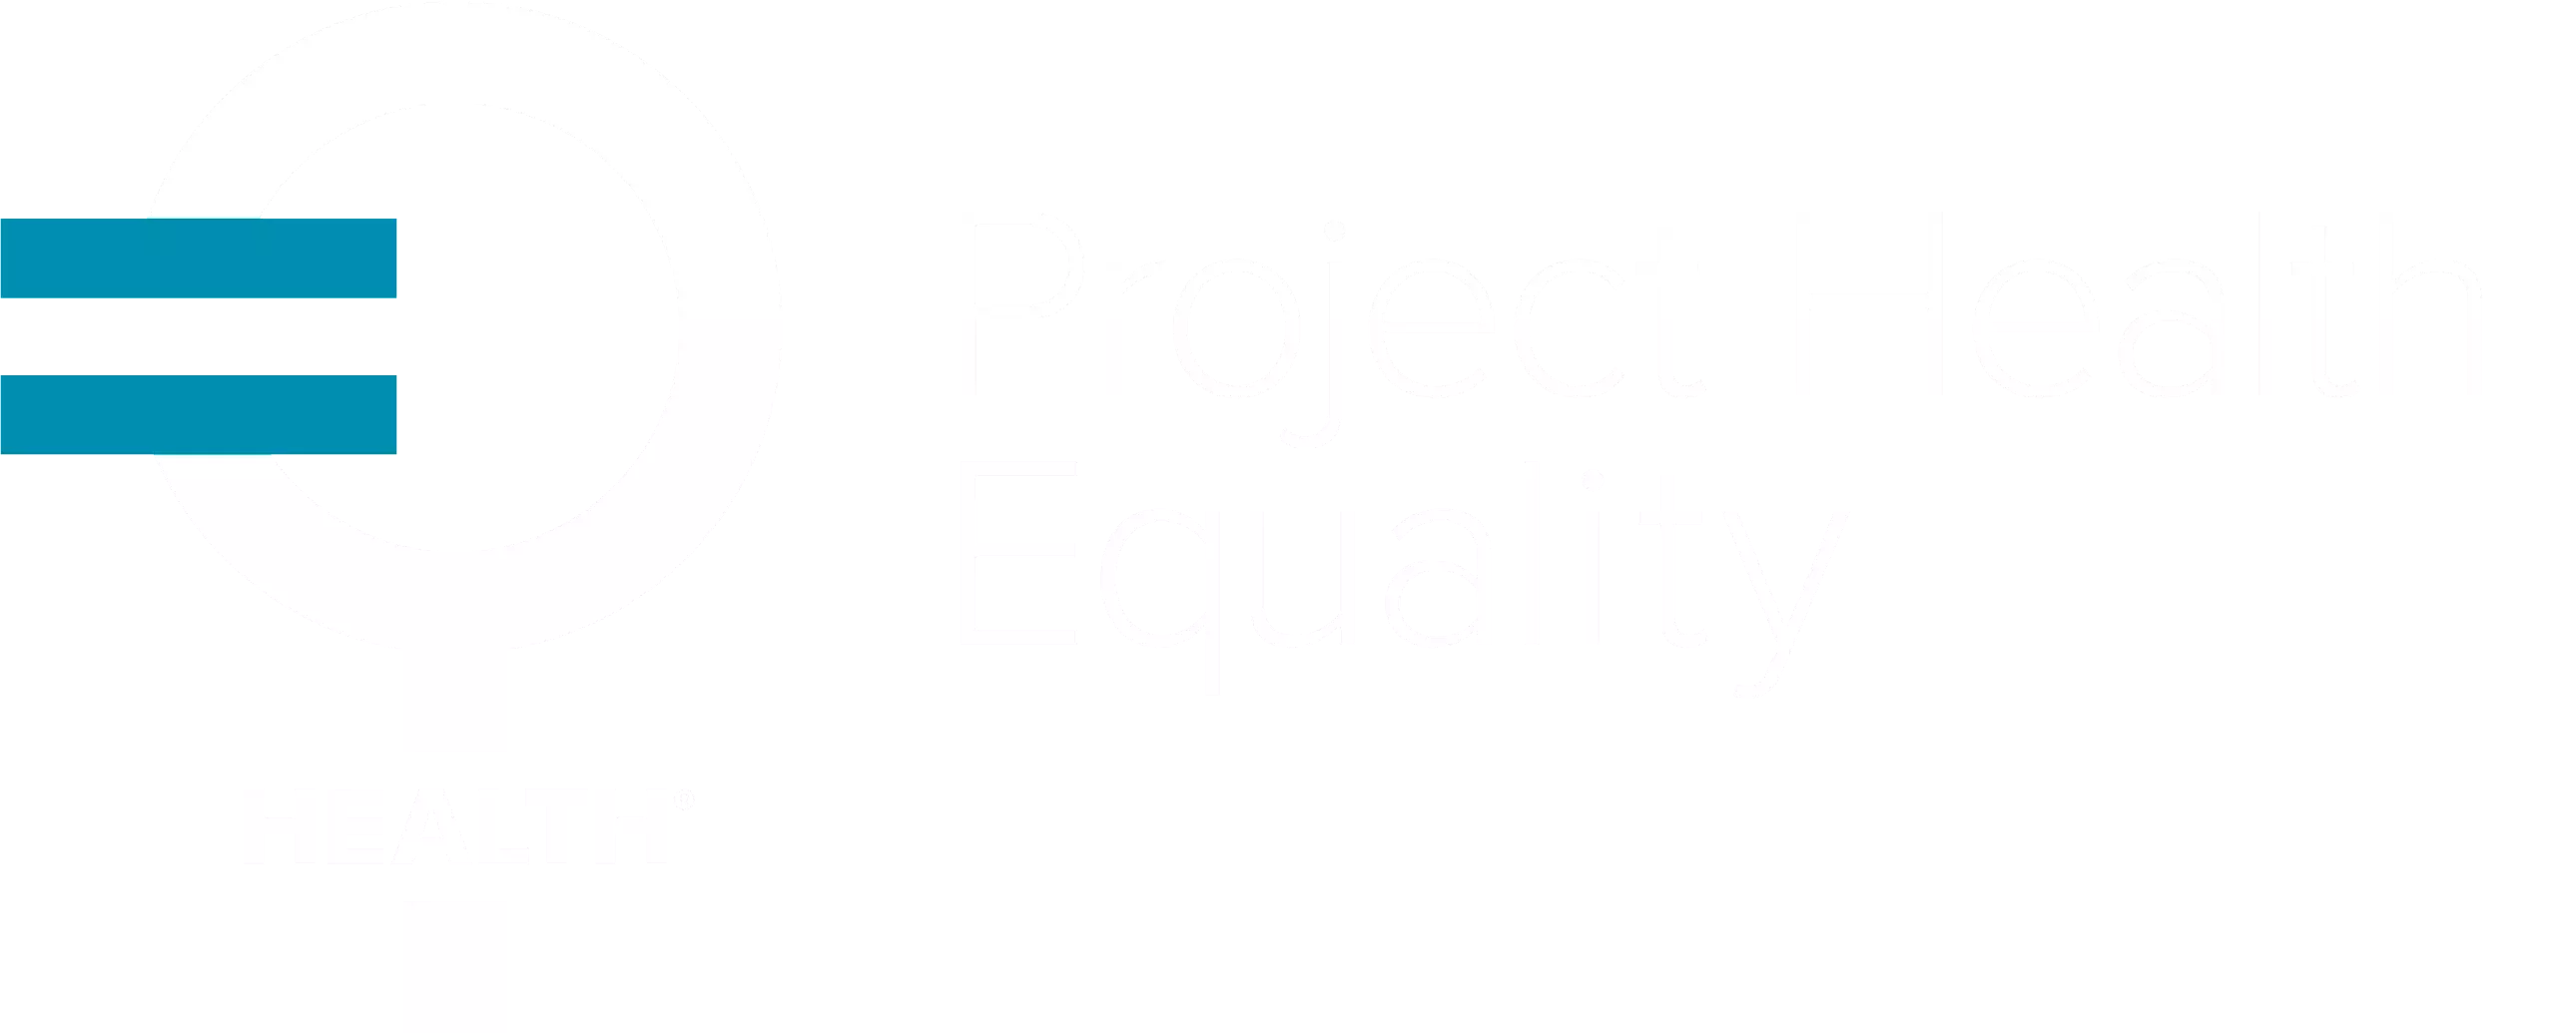 Project Health Equality logo without tagline